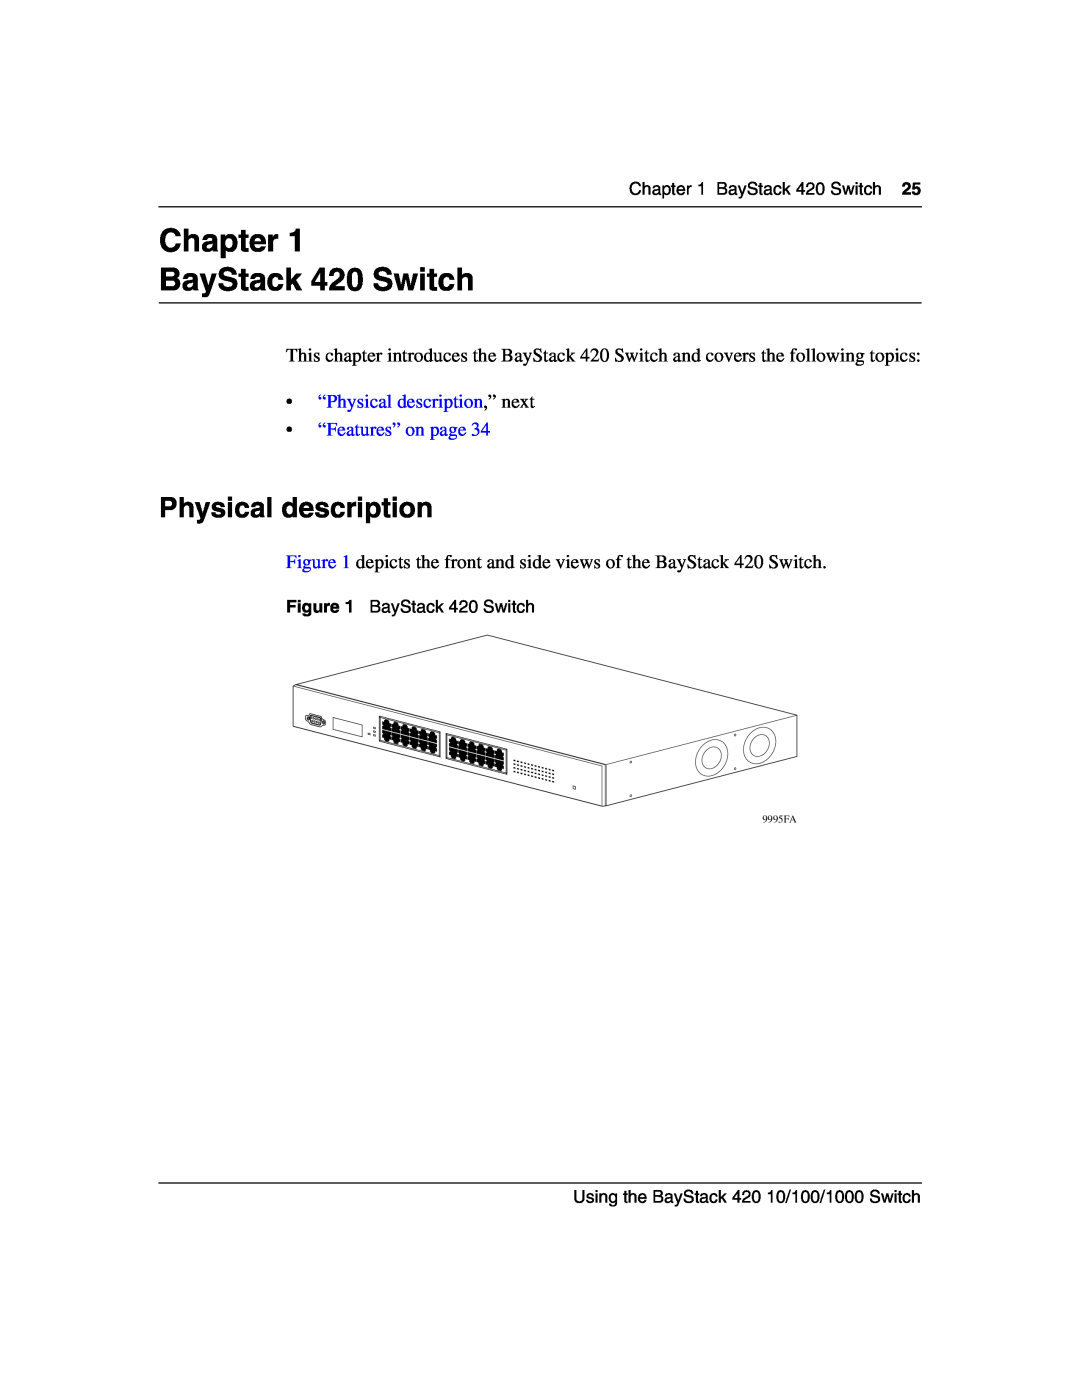 Nortel Networks 1000ASE-XD Chapter BayStack 420 Switch, Physical description, Using the BayStack 420 10/100/1000 Switch 